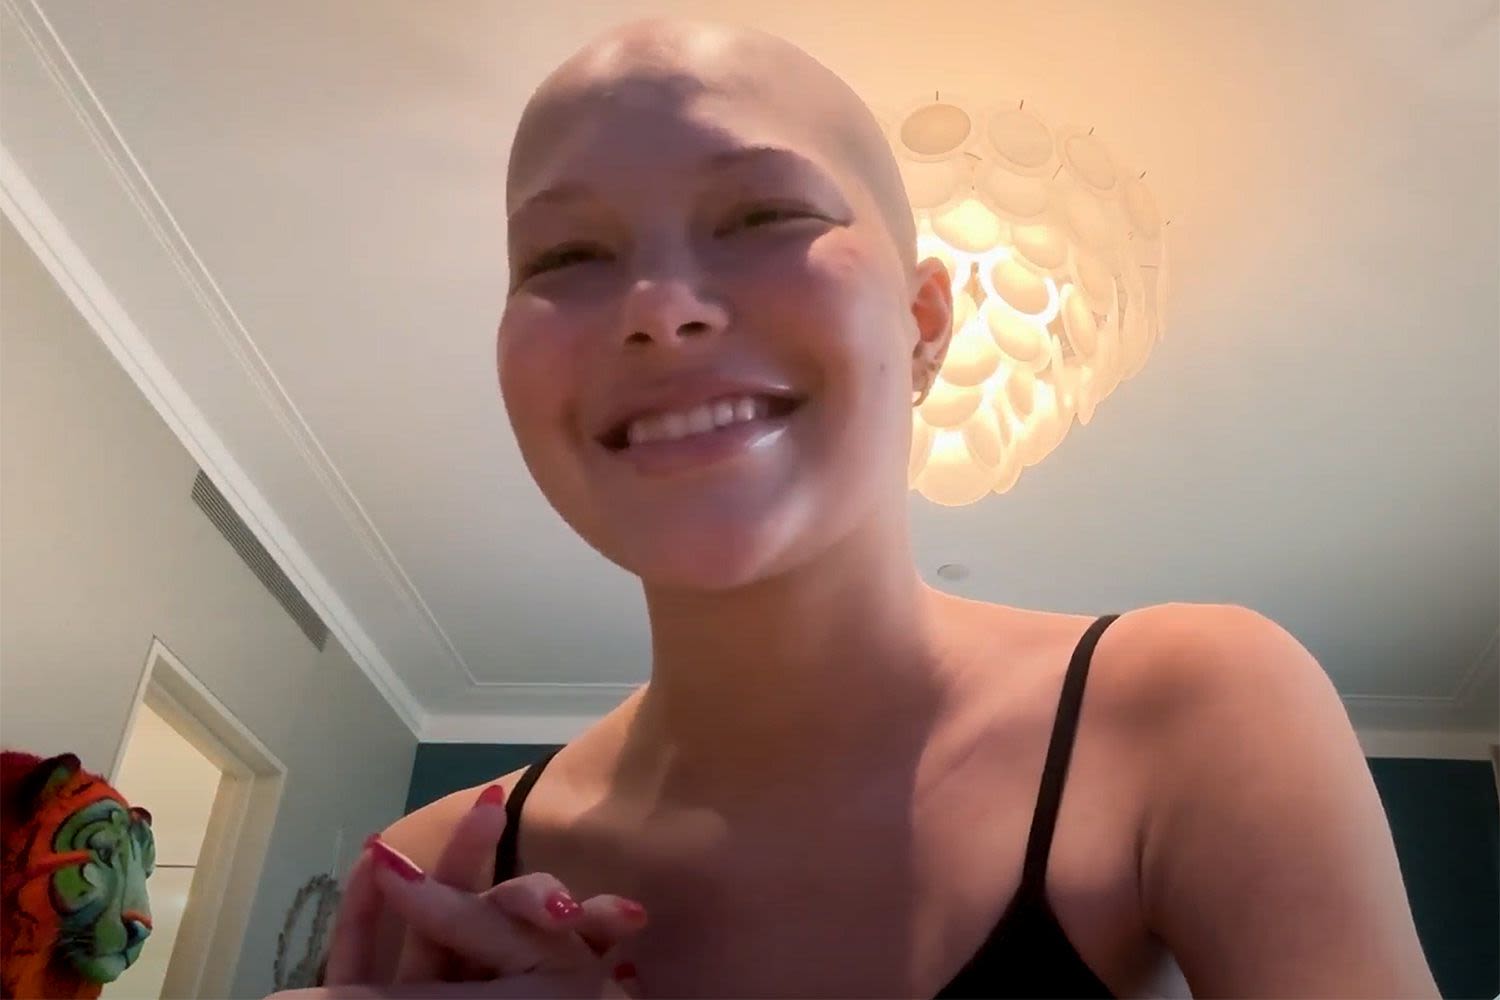 Michael Strahan’s Daughter Isabella Jokes About Hair Loss amid Chemo for Brain Tumor: 'Oh My Gosh, She's Bald!'